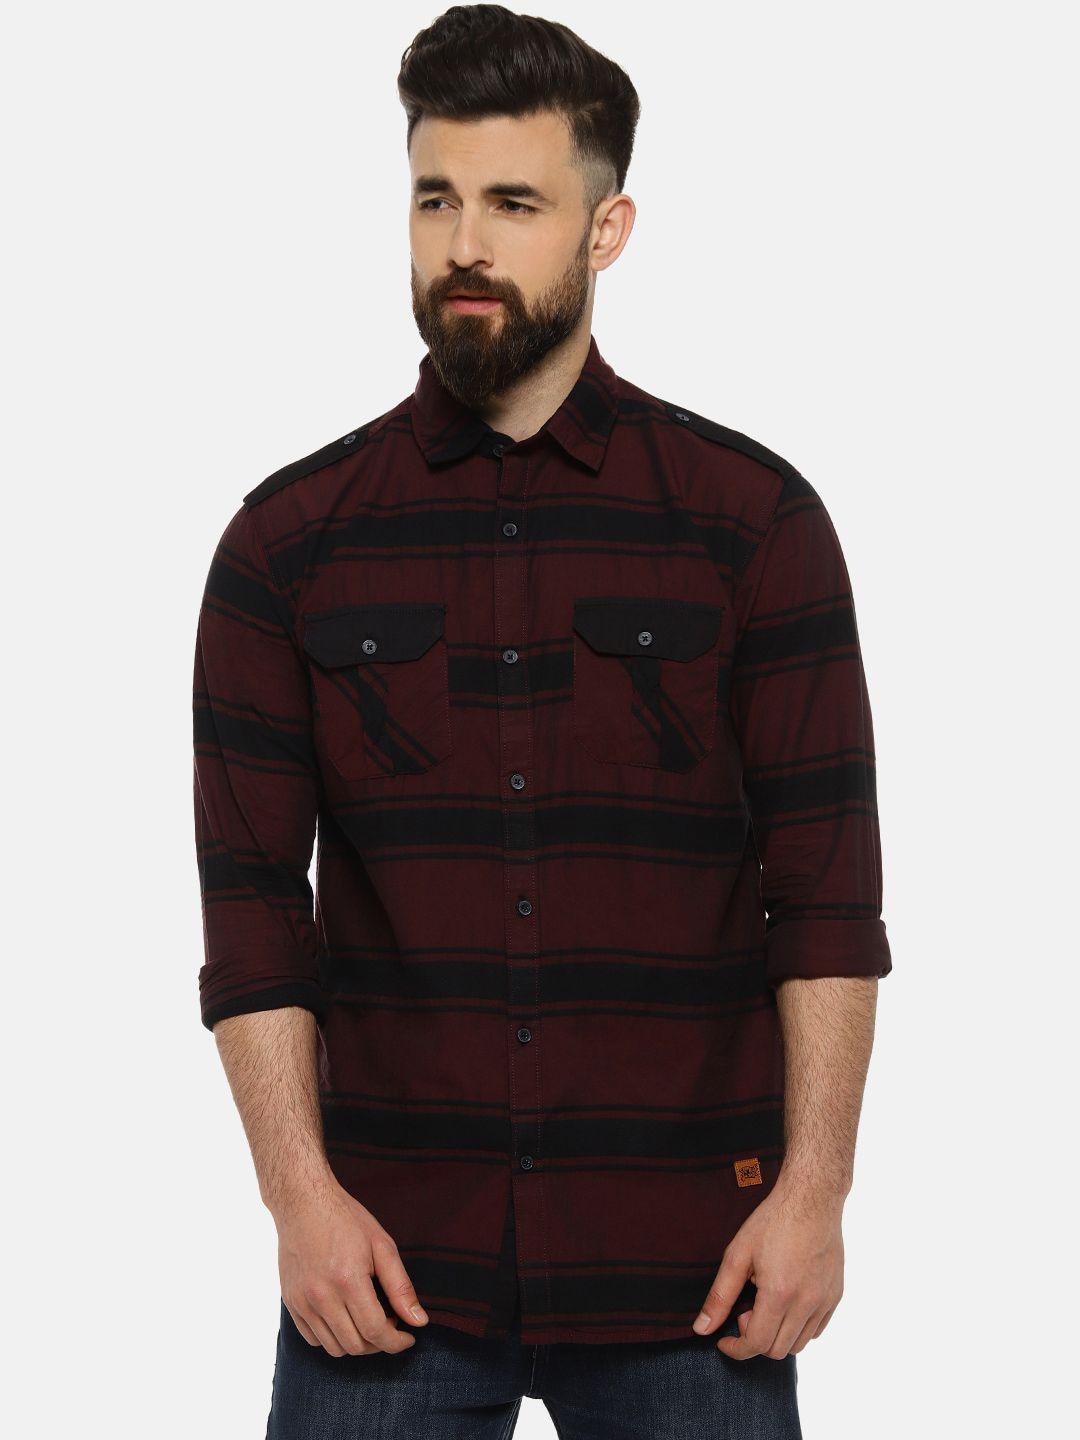 campus sutra men maroon regular fit striped casual shirt